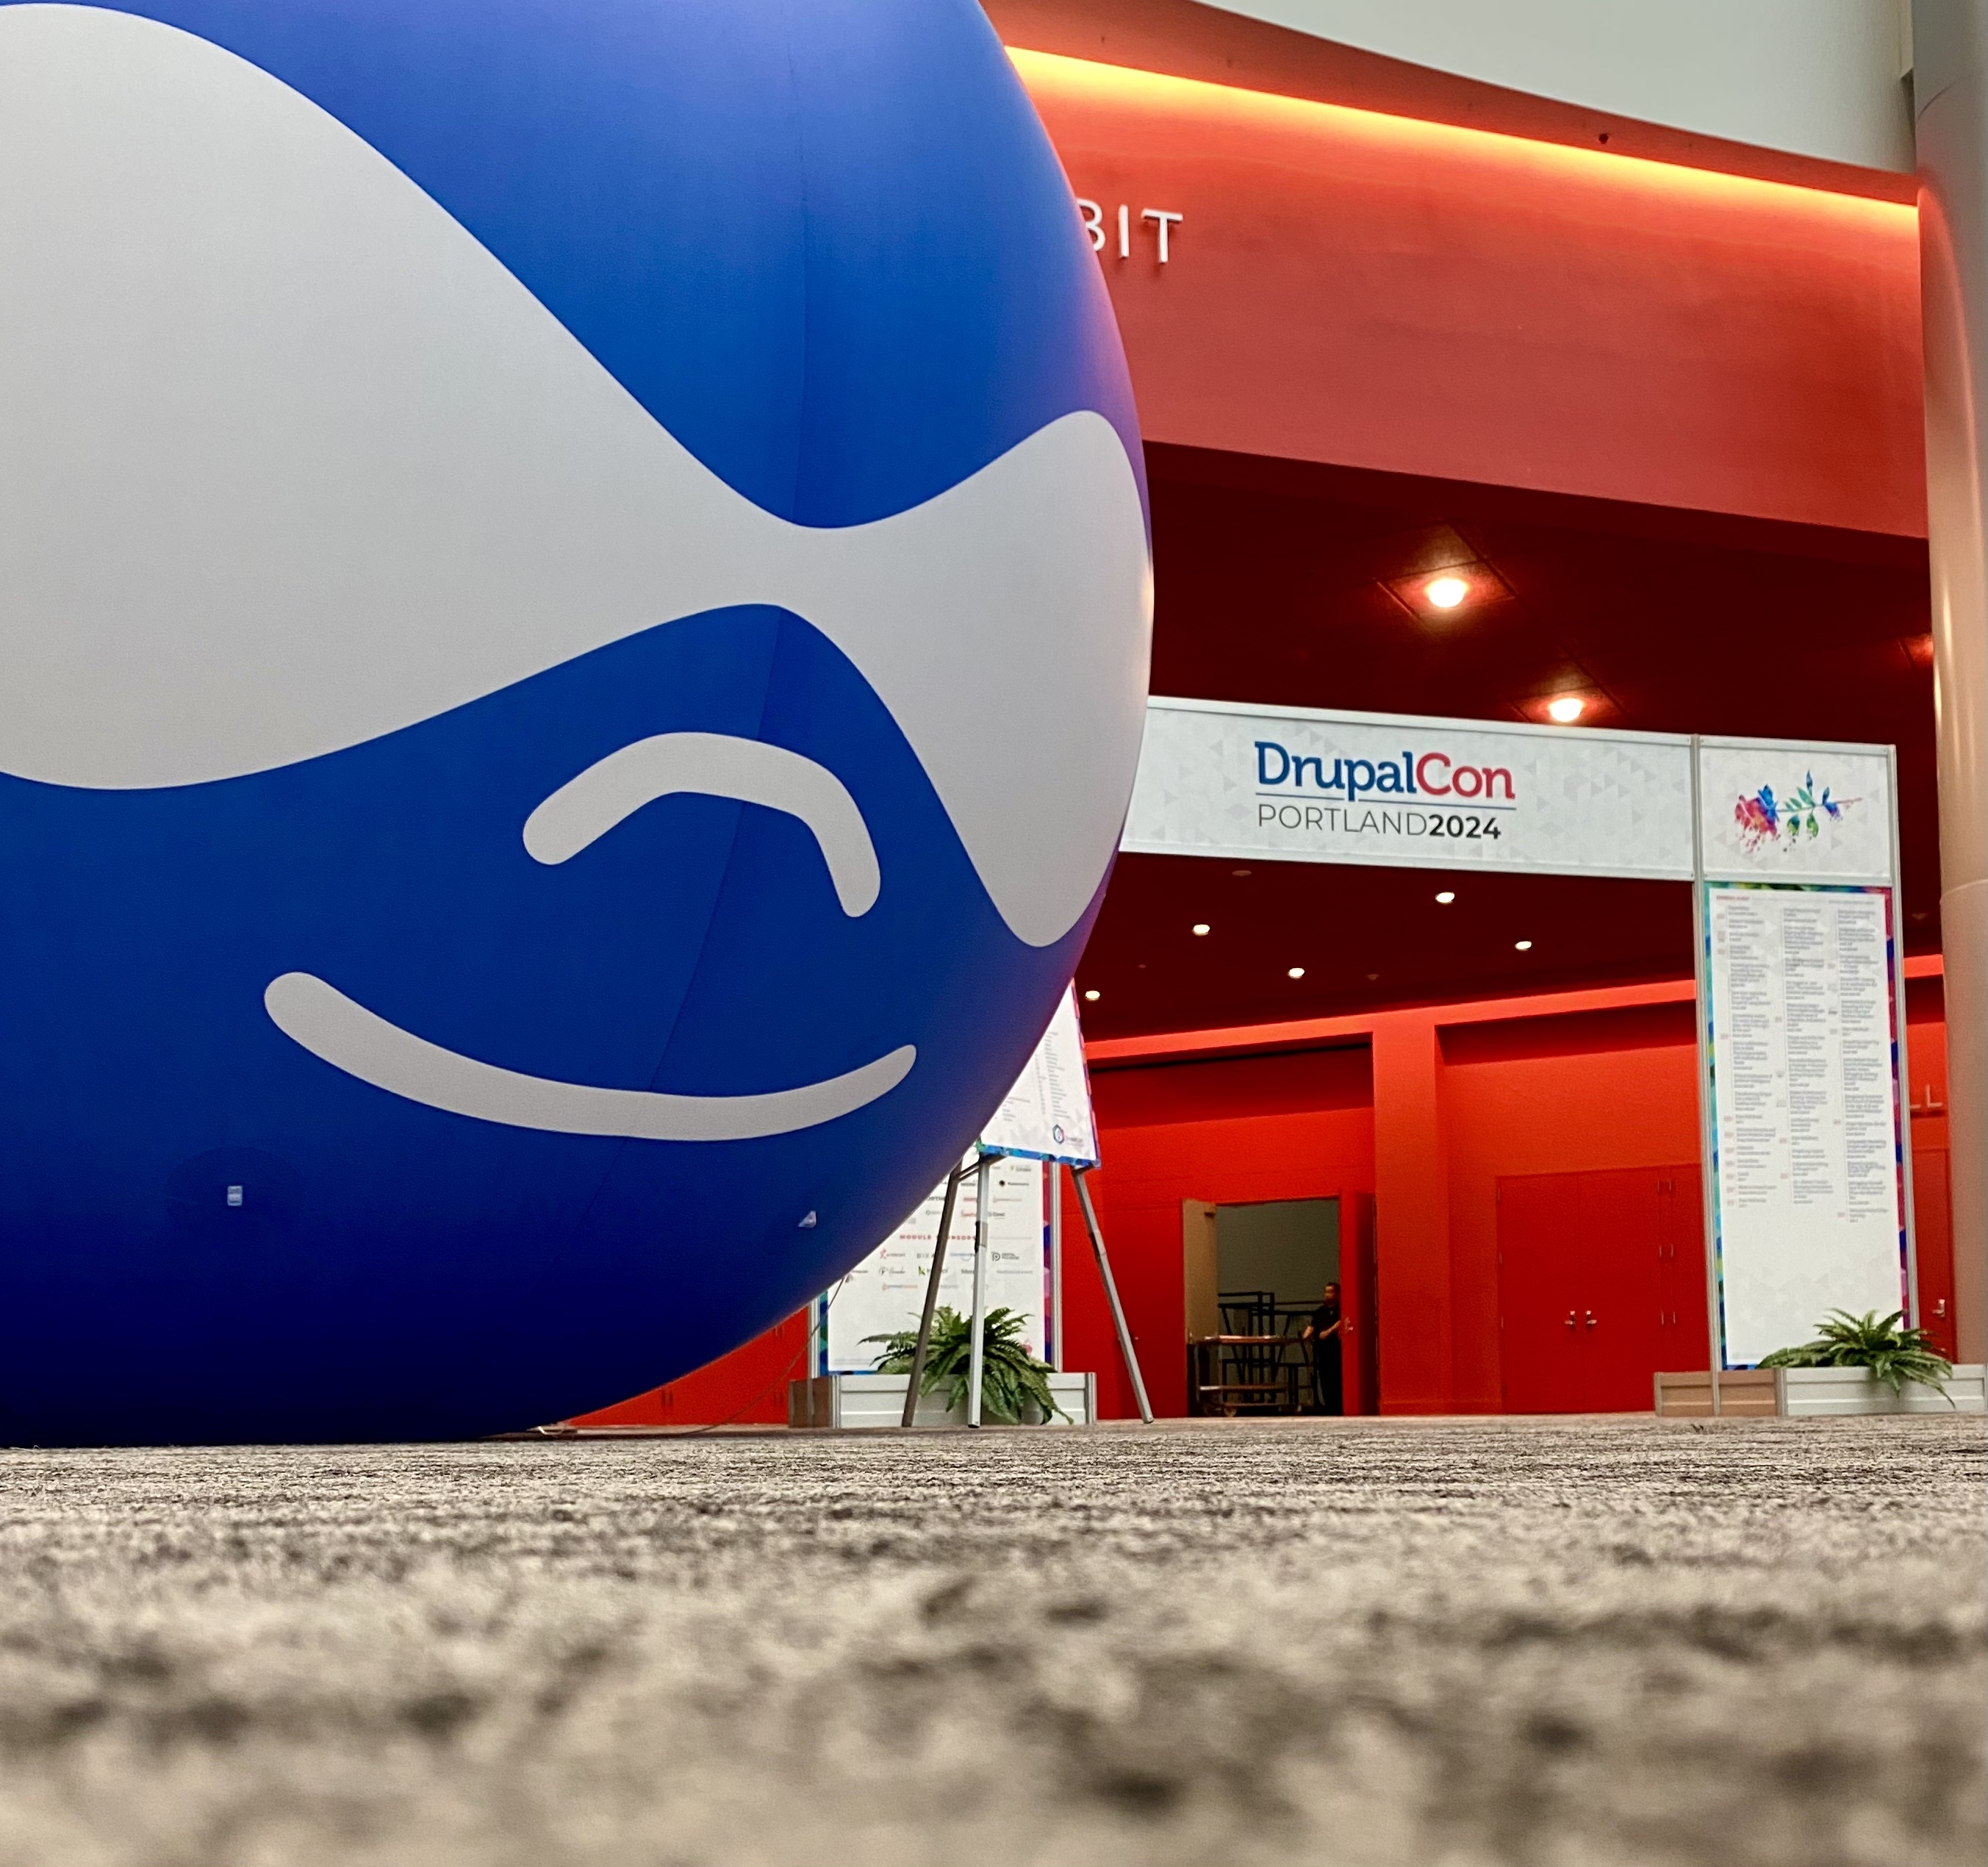 Image of Druplicon in the entrance to the Expo Hall